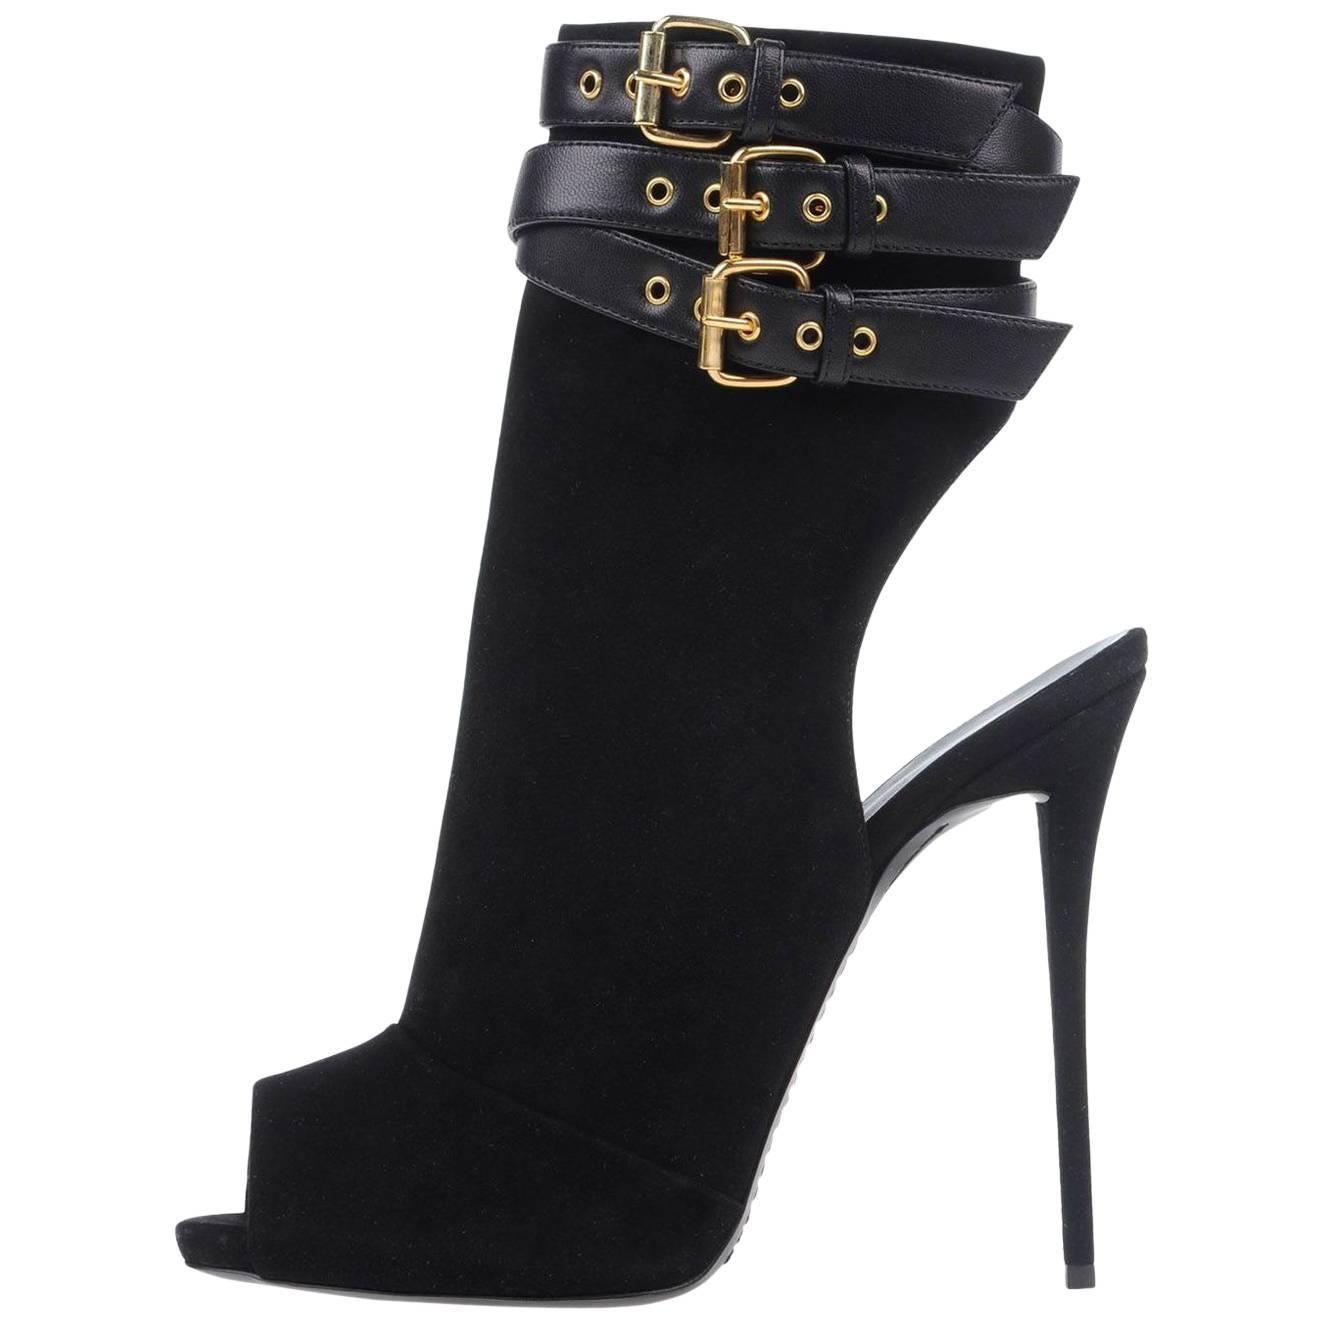 Giuseppe Zanotti New Black Suede Leather Buckle Ankle Boots Booties in Box